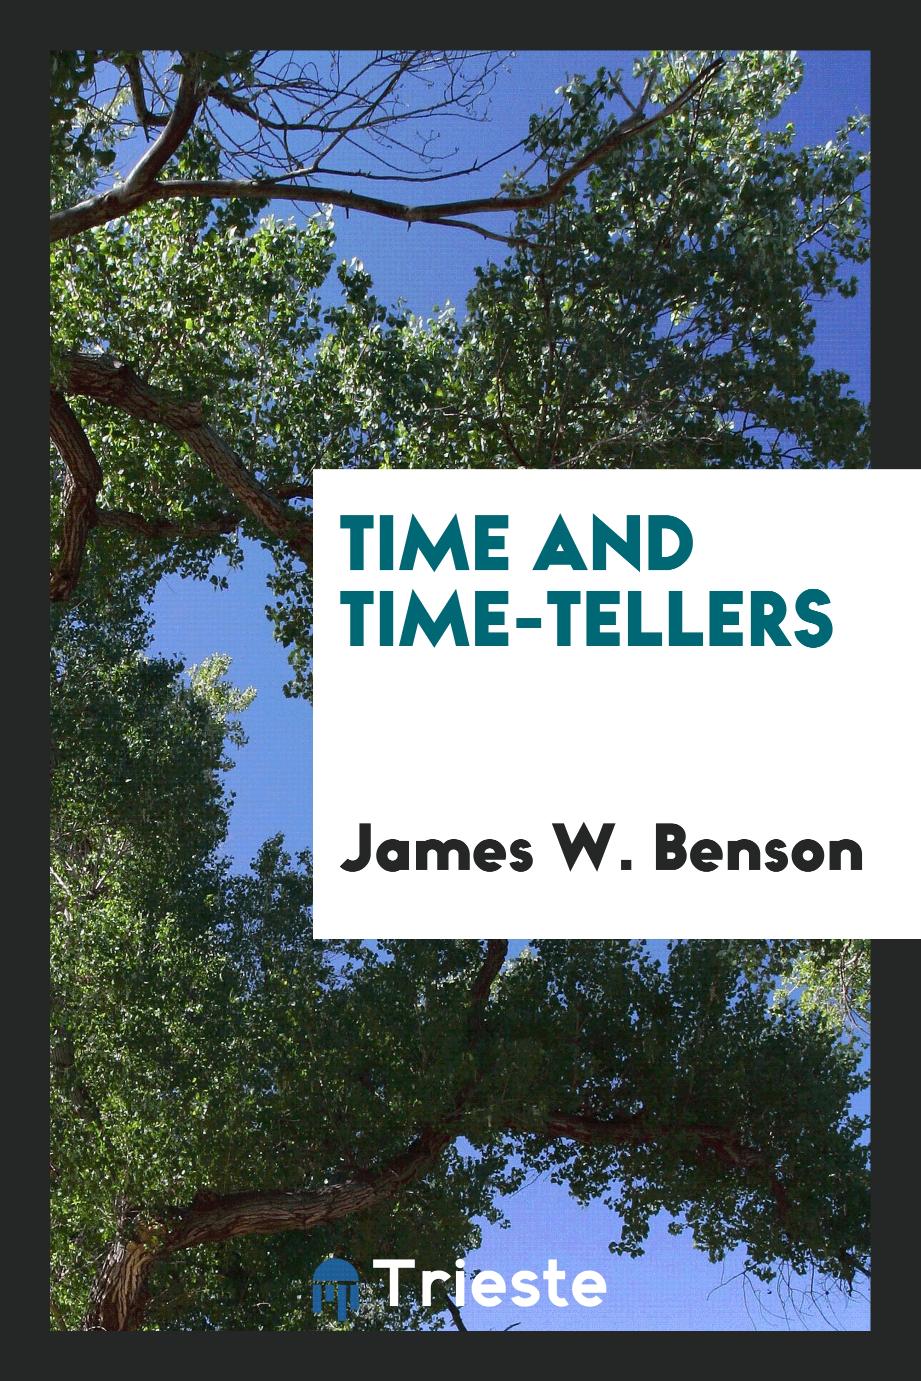 Time and time-tellers